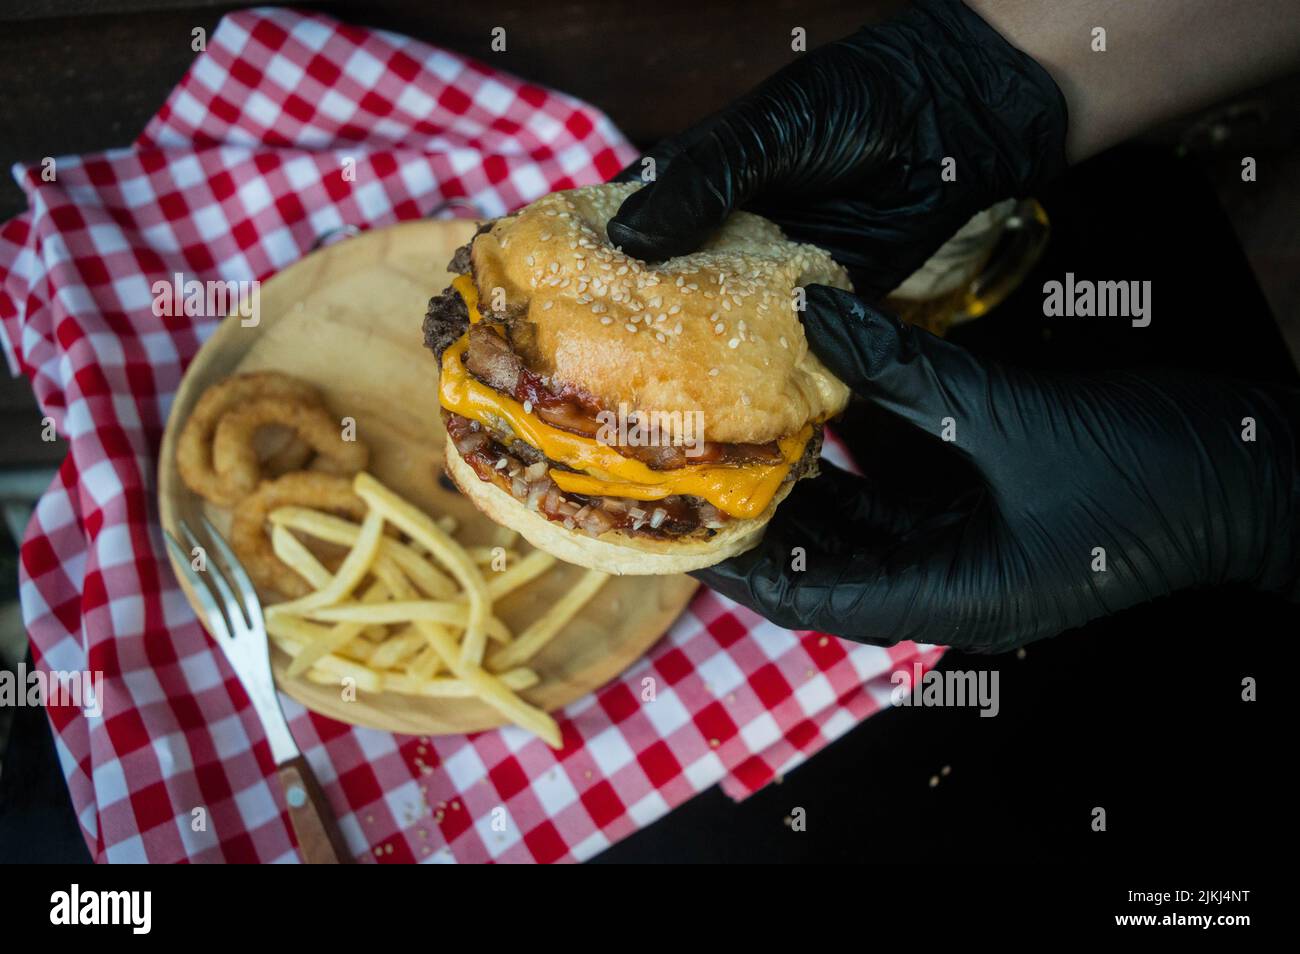 A close-up shot of hands holding a burger in the background of onion rings and french fries on a wooden plate. Stock Photo